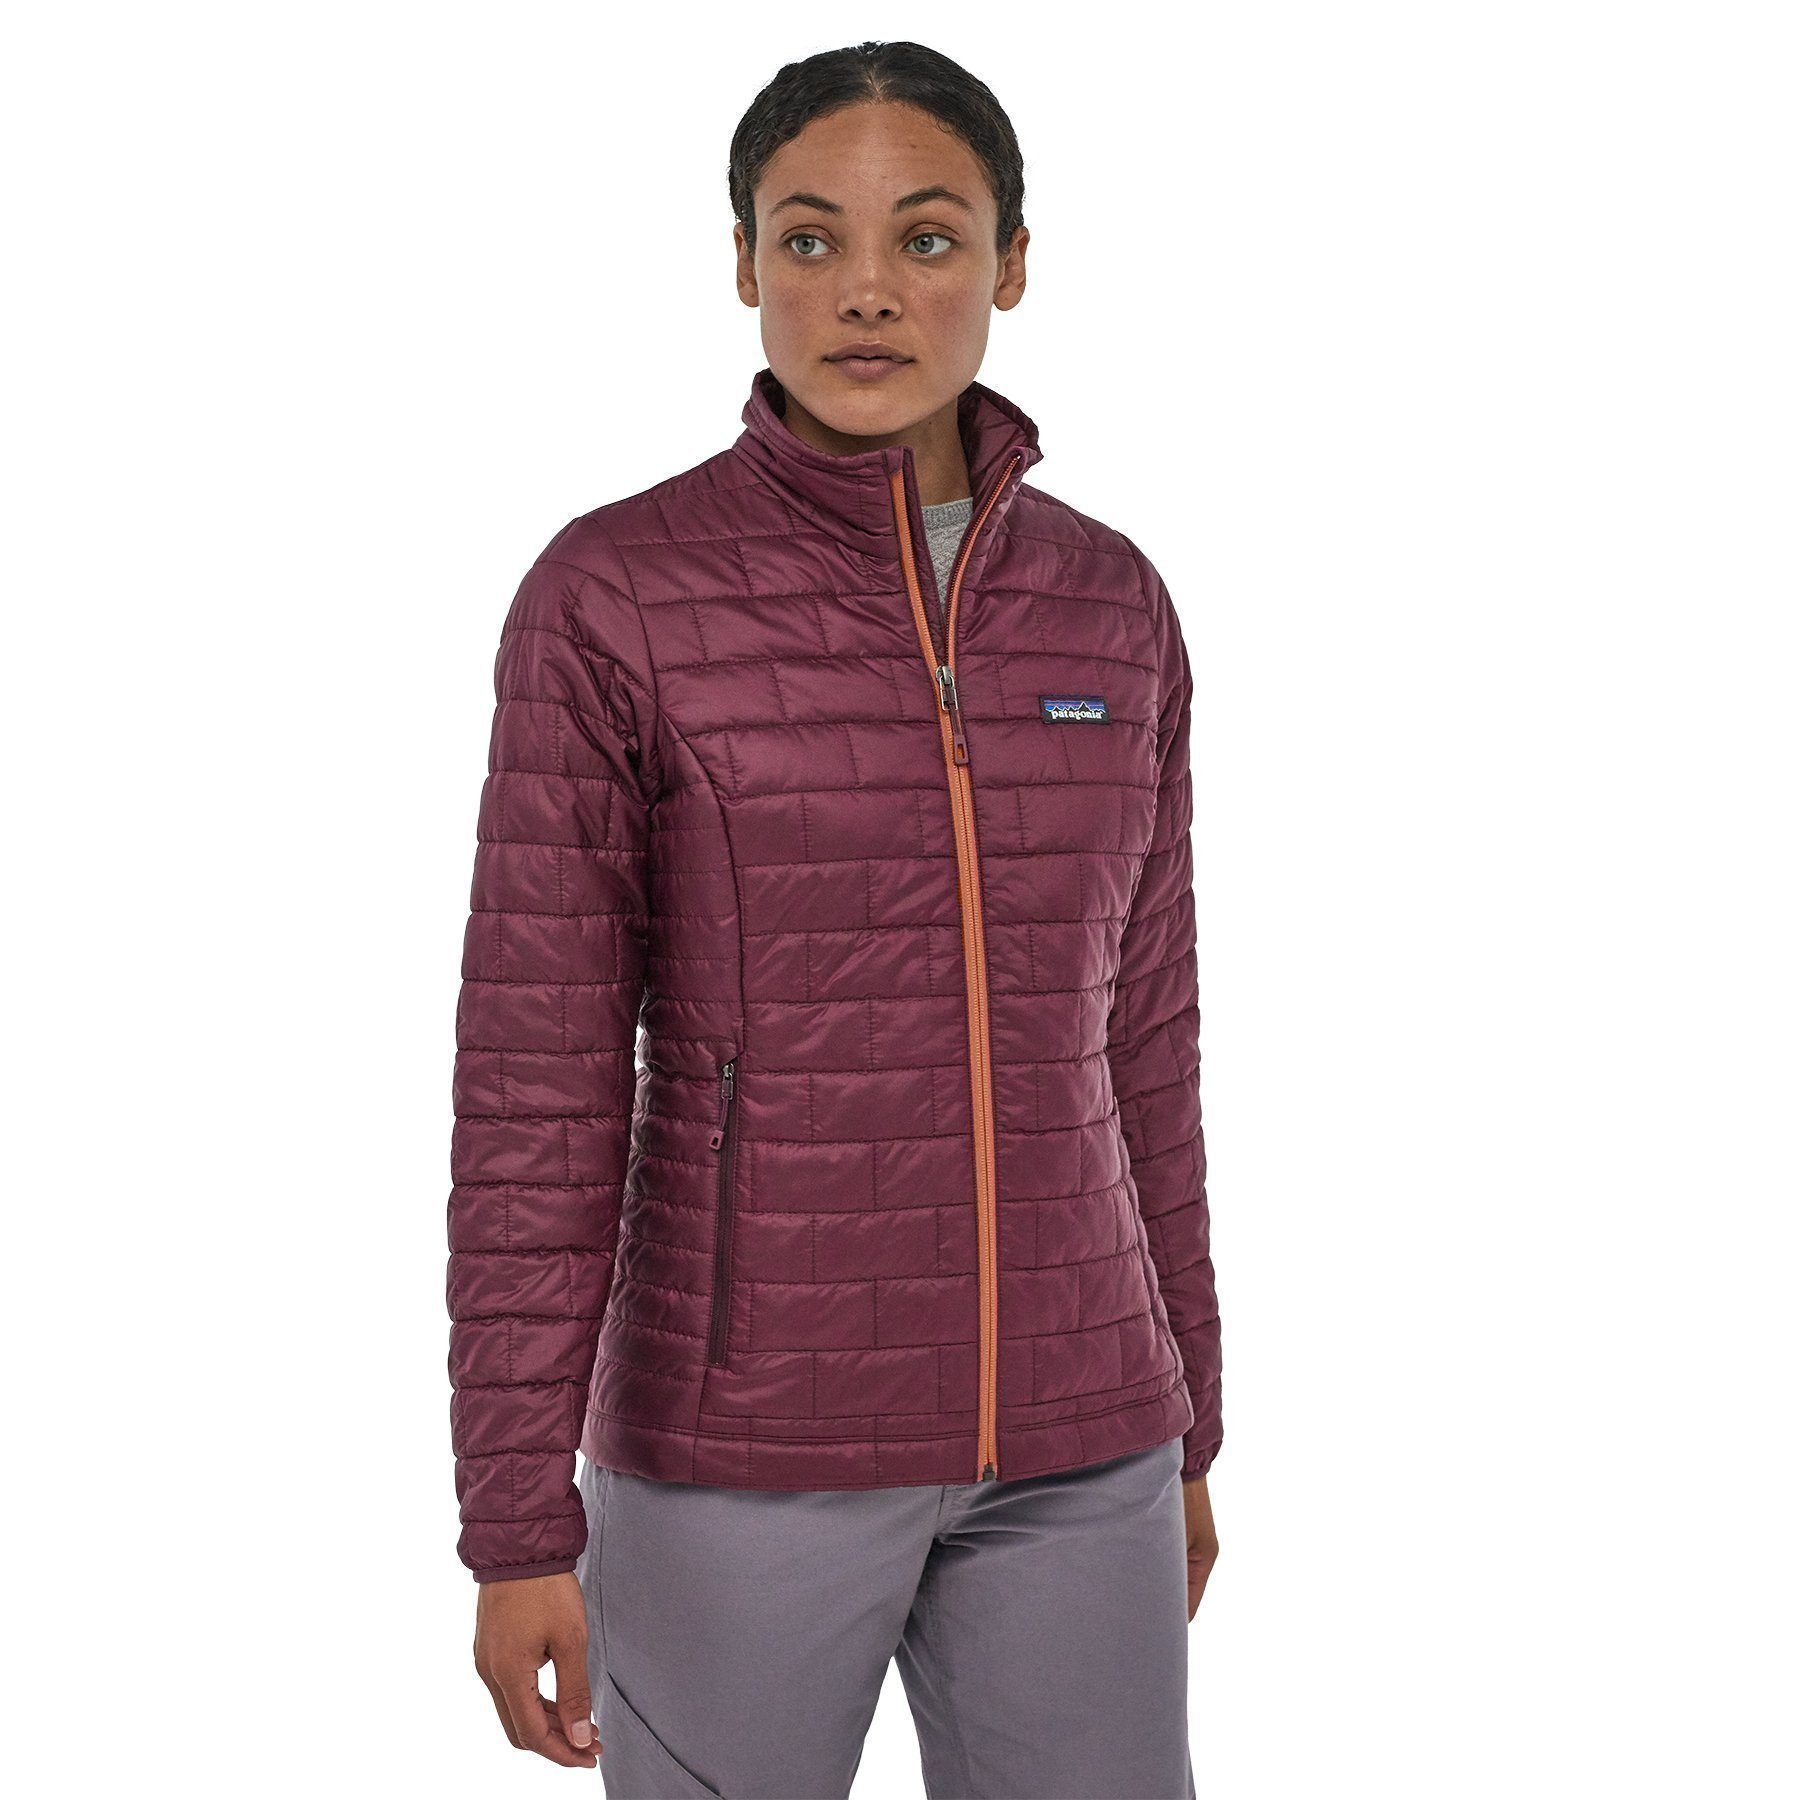 Patagonia Women's Nano Puff® Jacket - Recycled Polyester, Light Balsamic / S